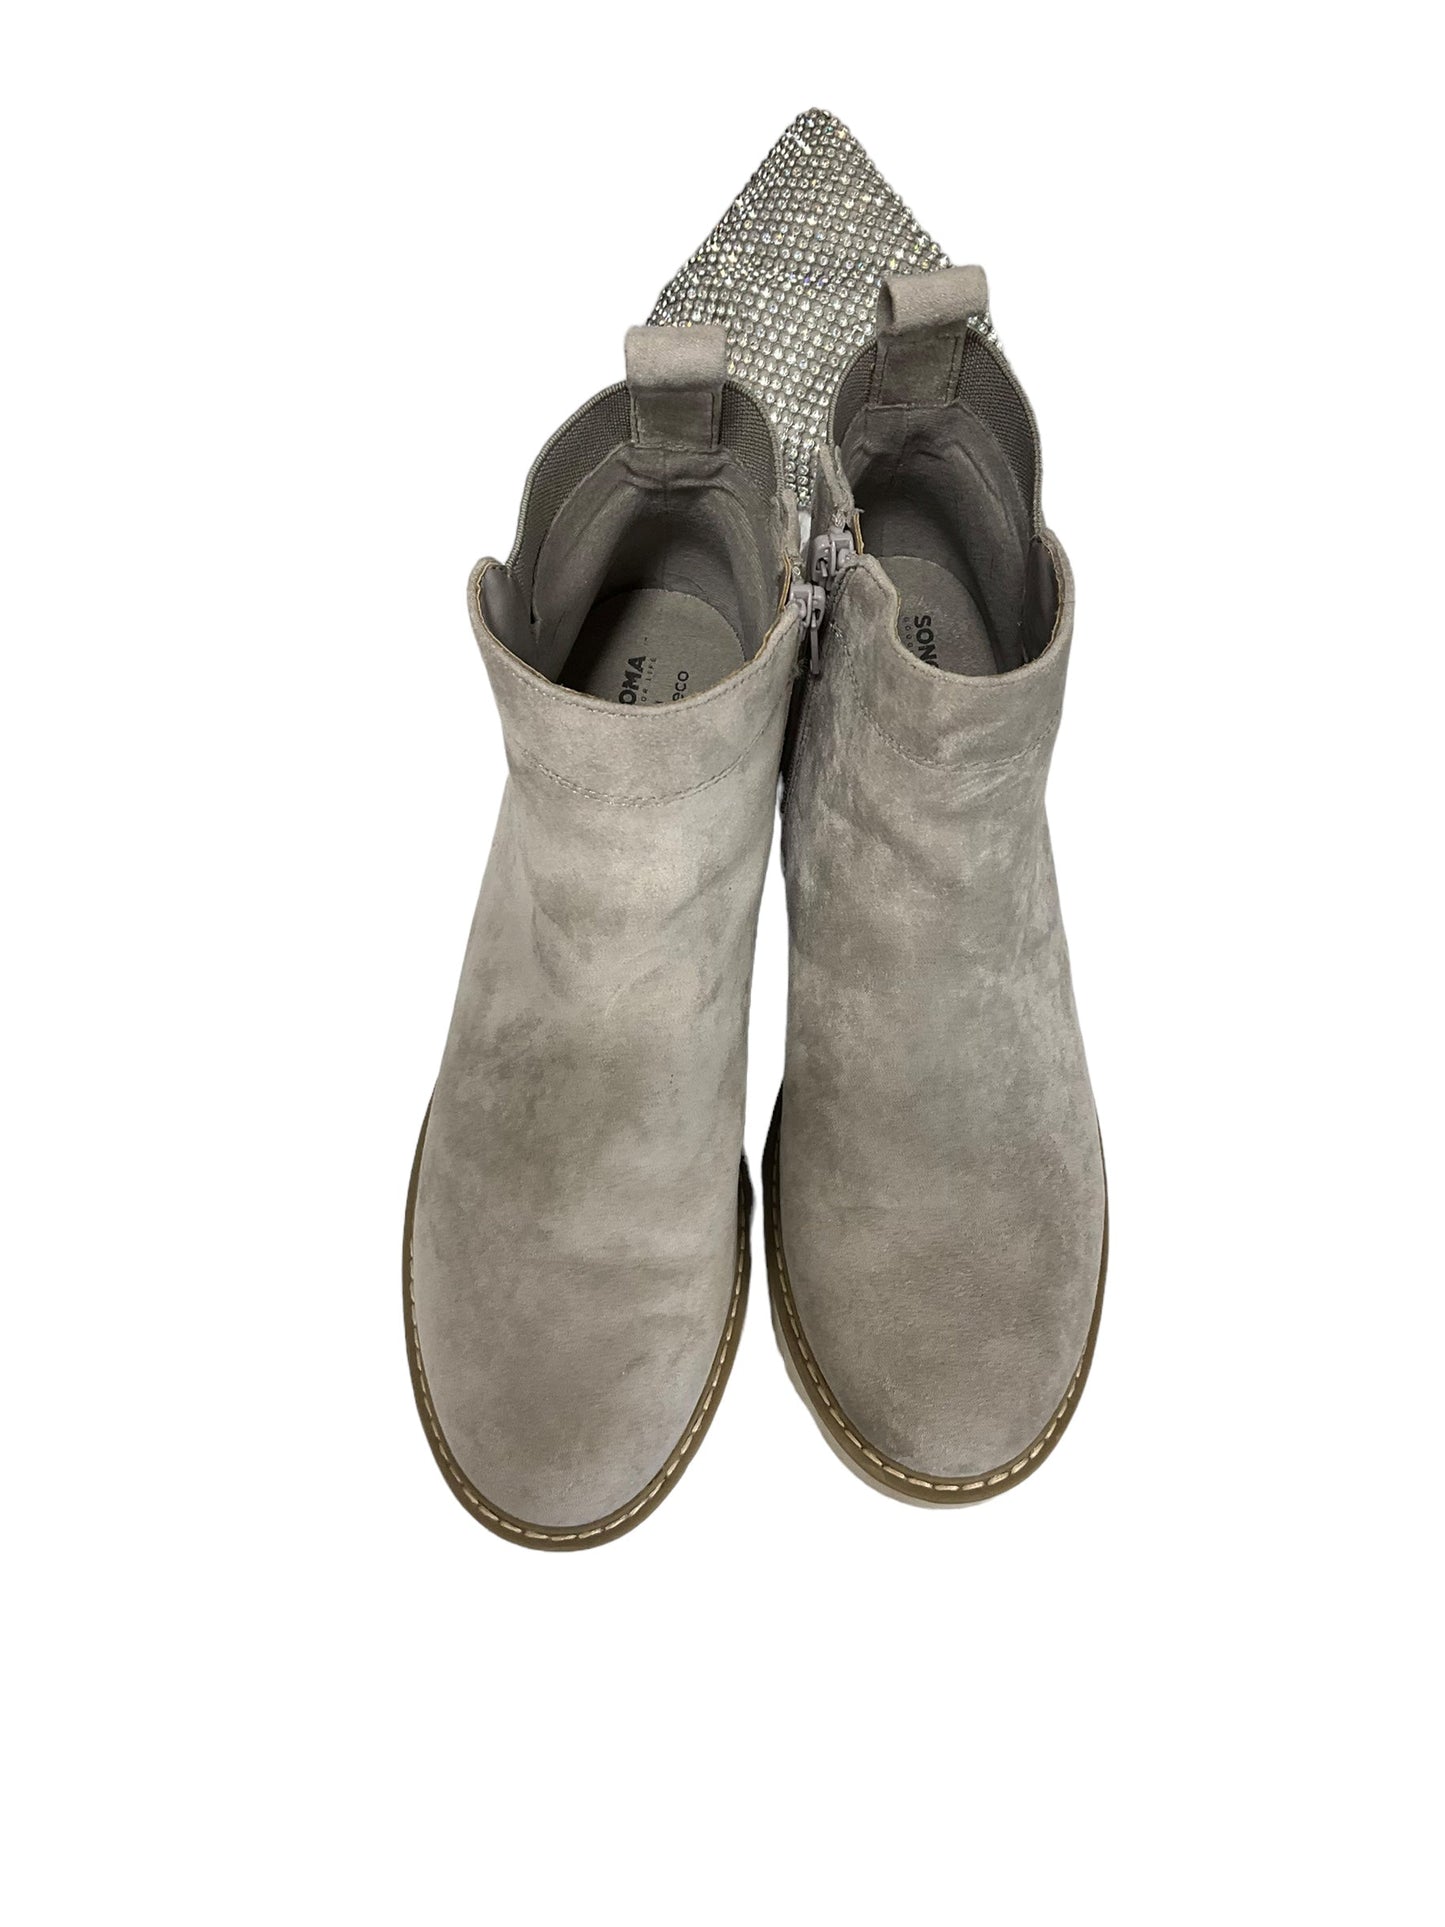 Grey Boots Ankle Heels Sonoma, Size 10